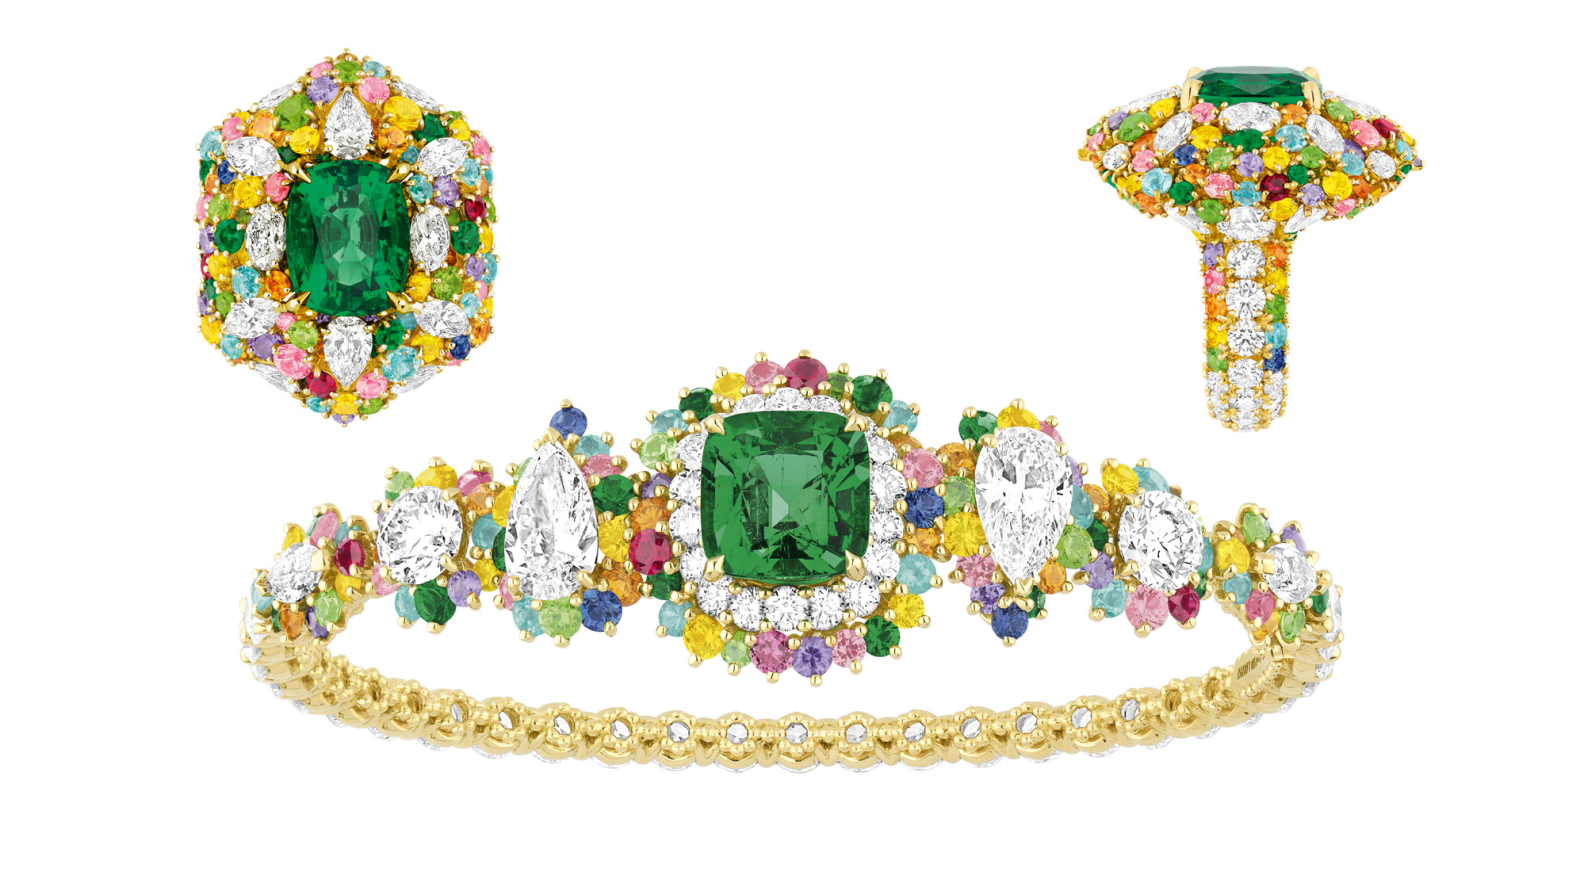 Cher Dior”, the new Dior high jewelry collection - LVMH